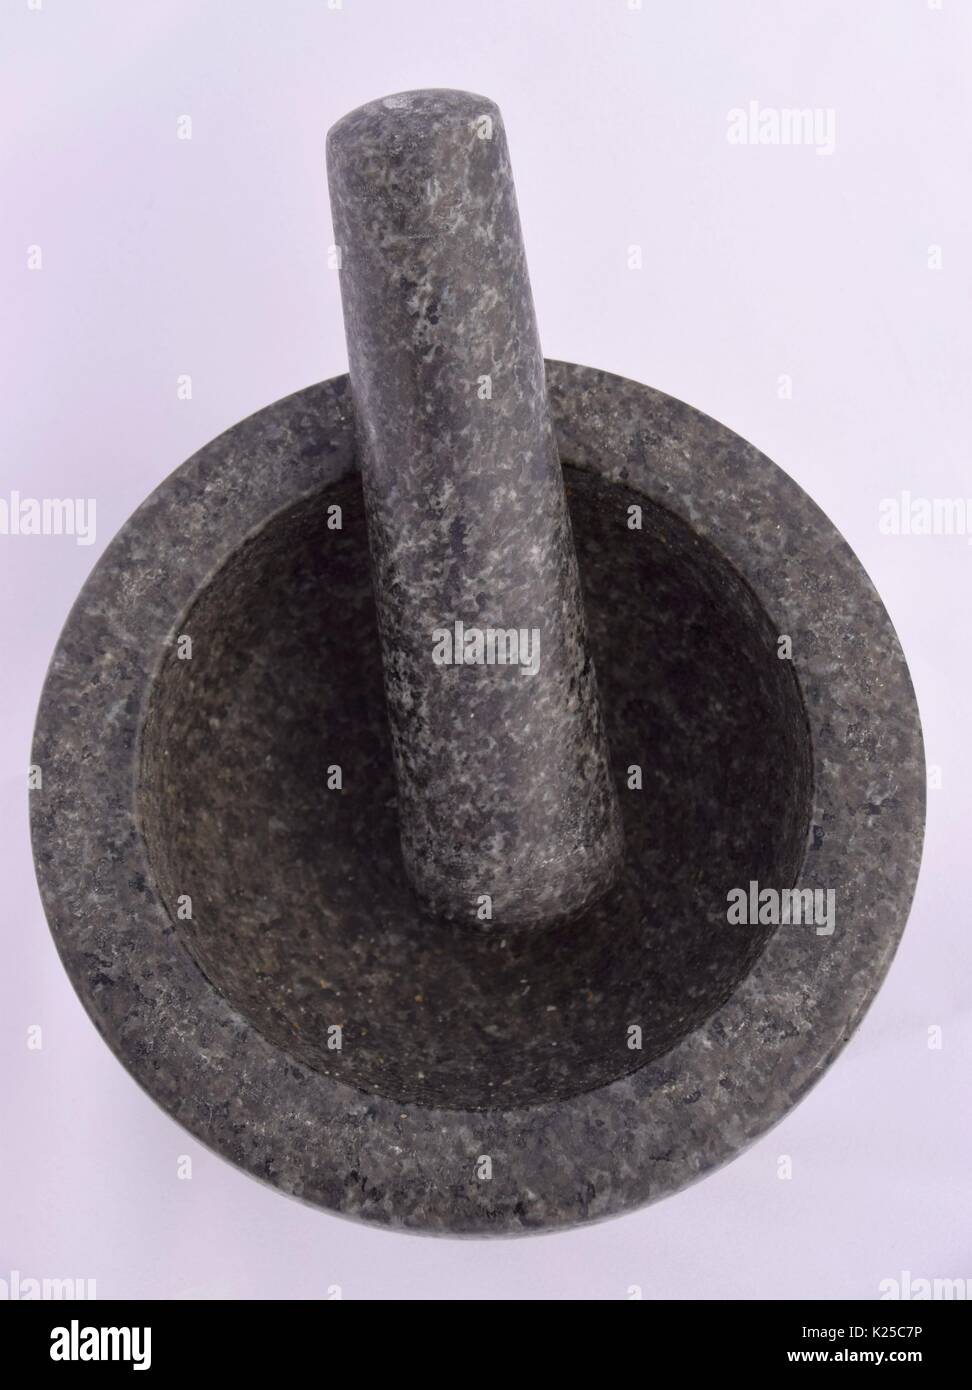 Mortar and pestle made of black marble or granite, grind the spices, mortar grinding machine, prepare ingredients or substances, preparing medicines Stock Photo